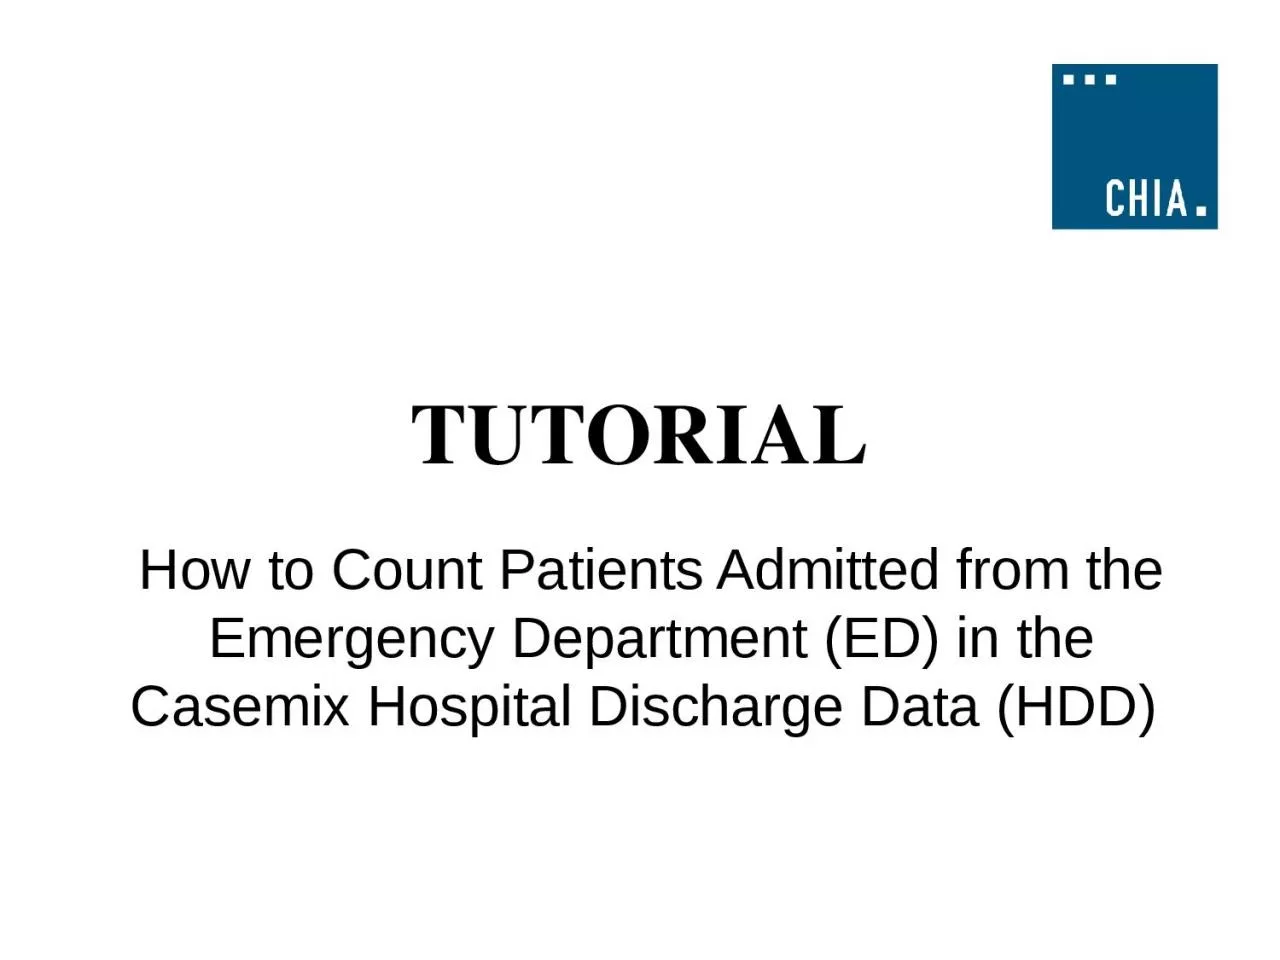 TUTORIAL How to Count Patients Admitted from the Emergency Department (ED) in the Casemix